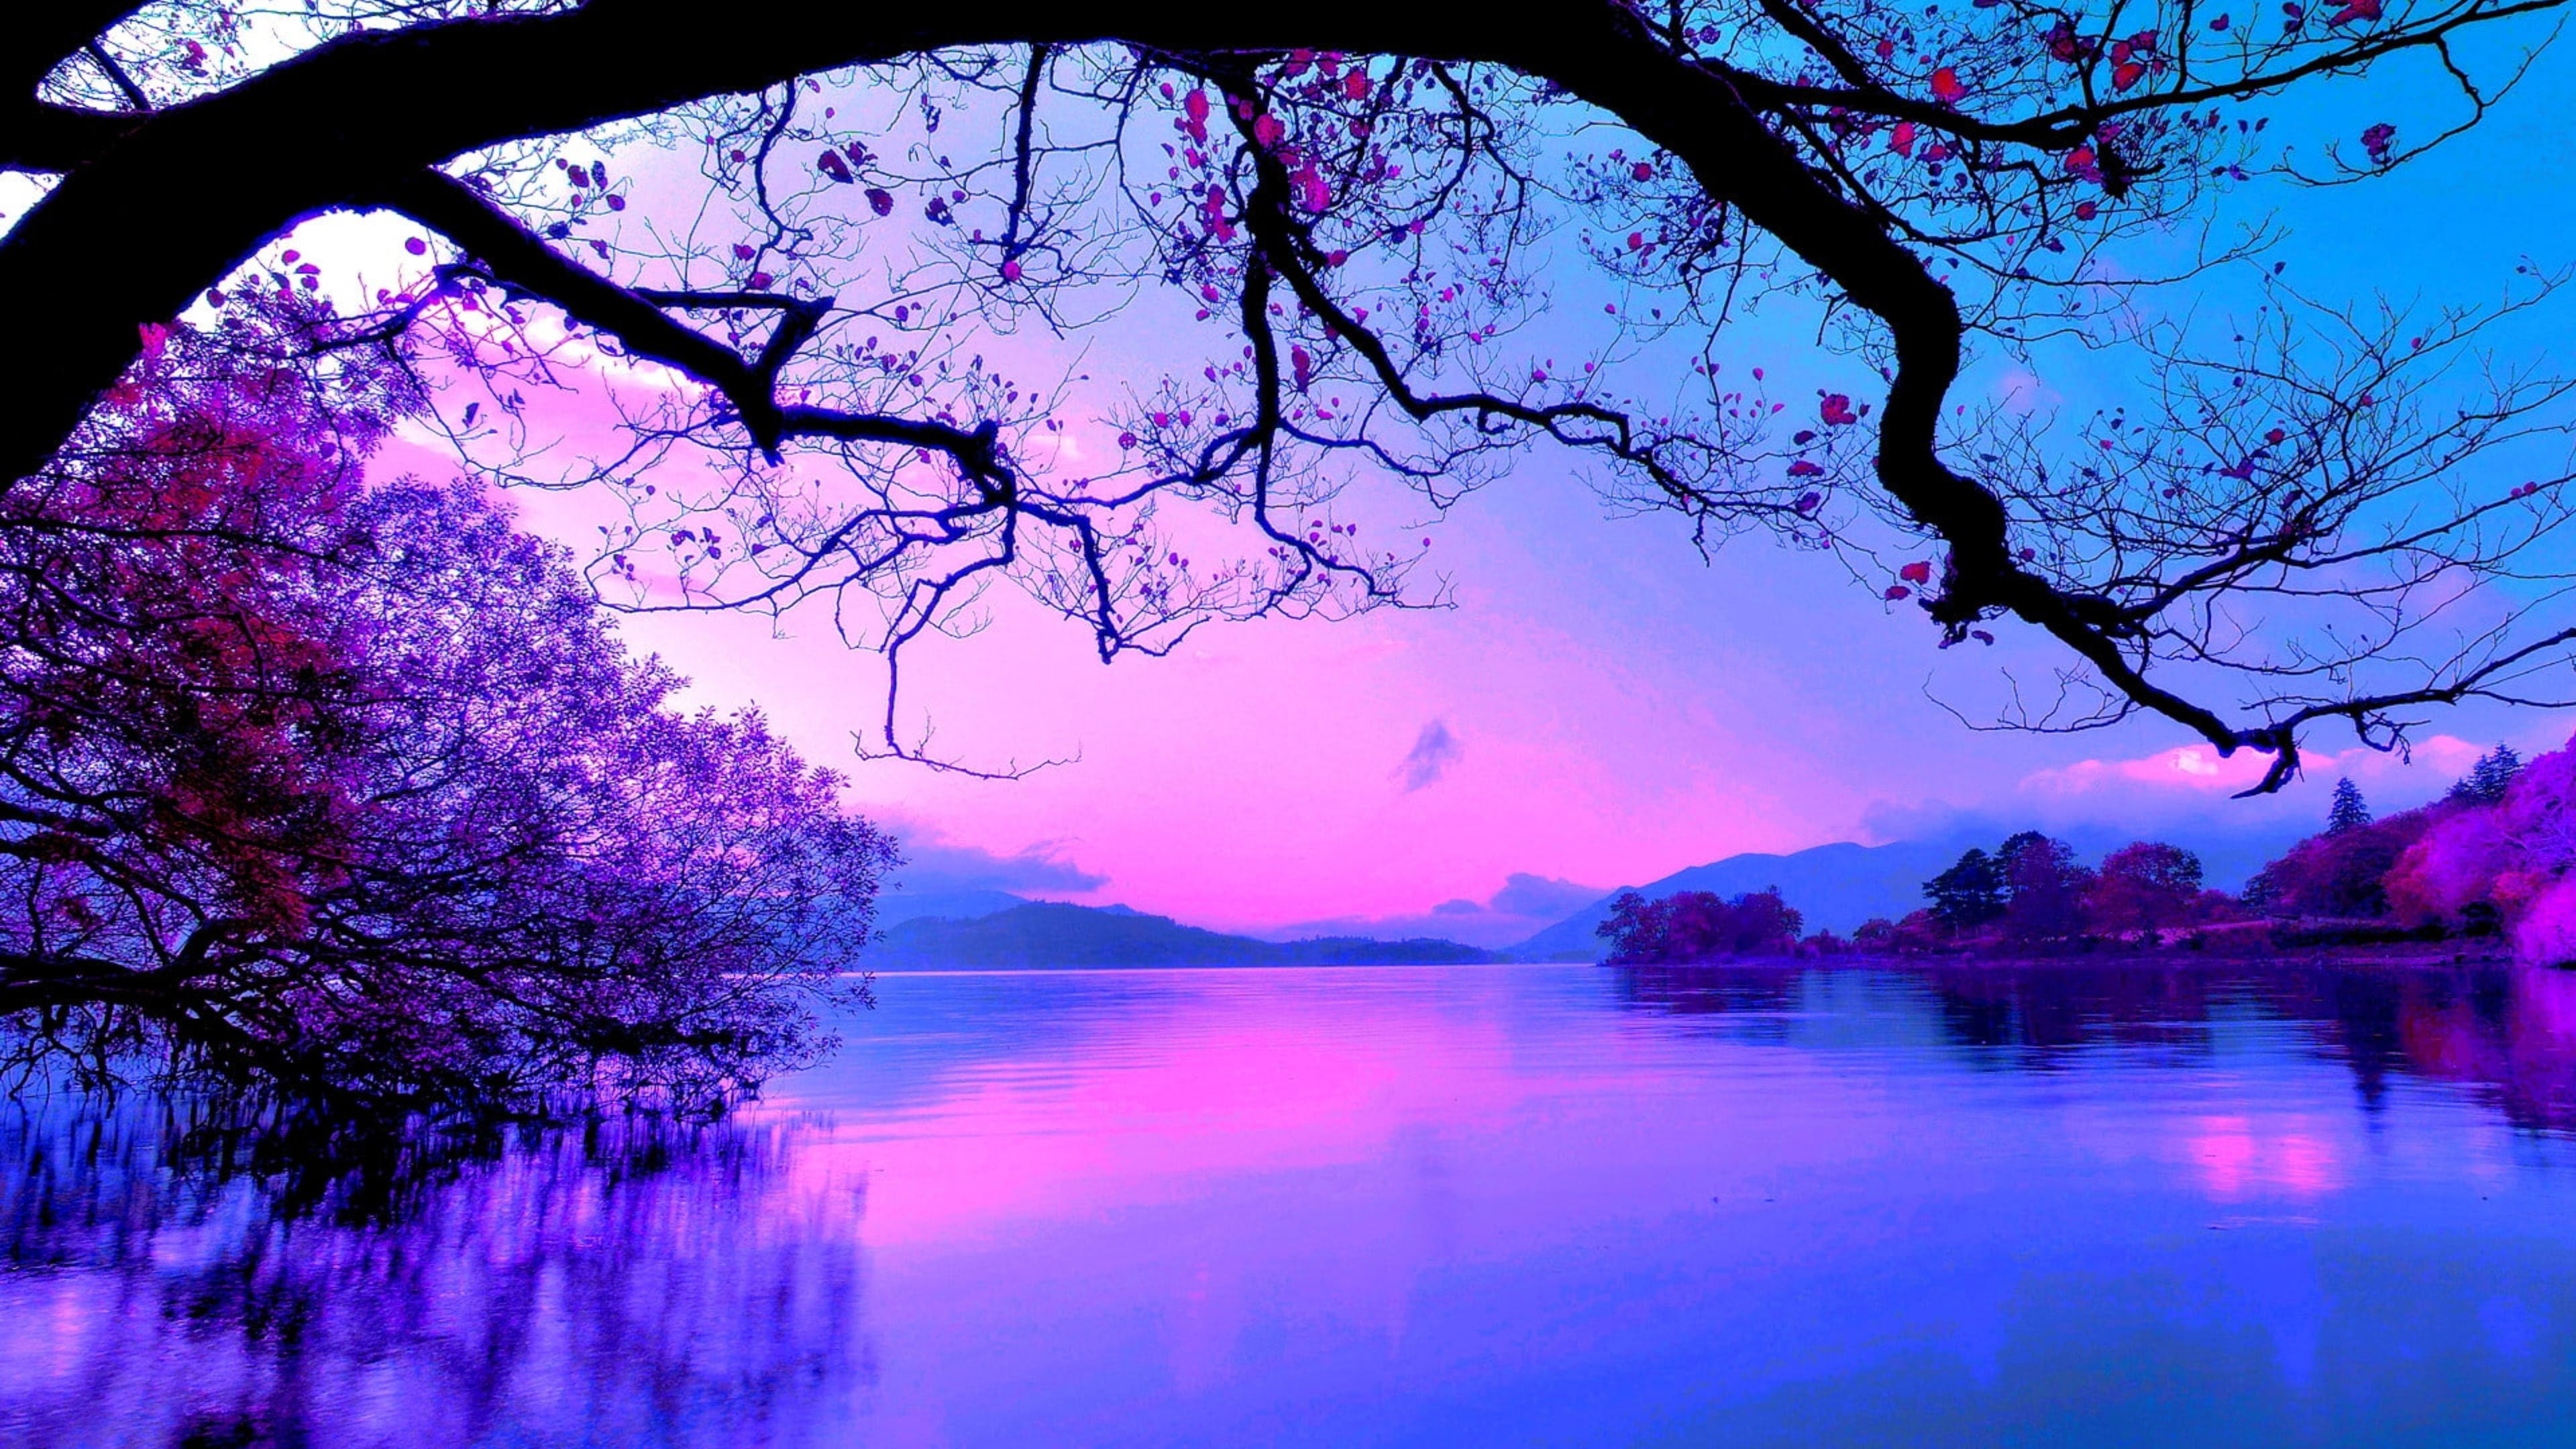 Beautiful Purple Sky And Trees With Reflection On Body Of Water 4K HD Nature Wallpaper